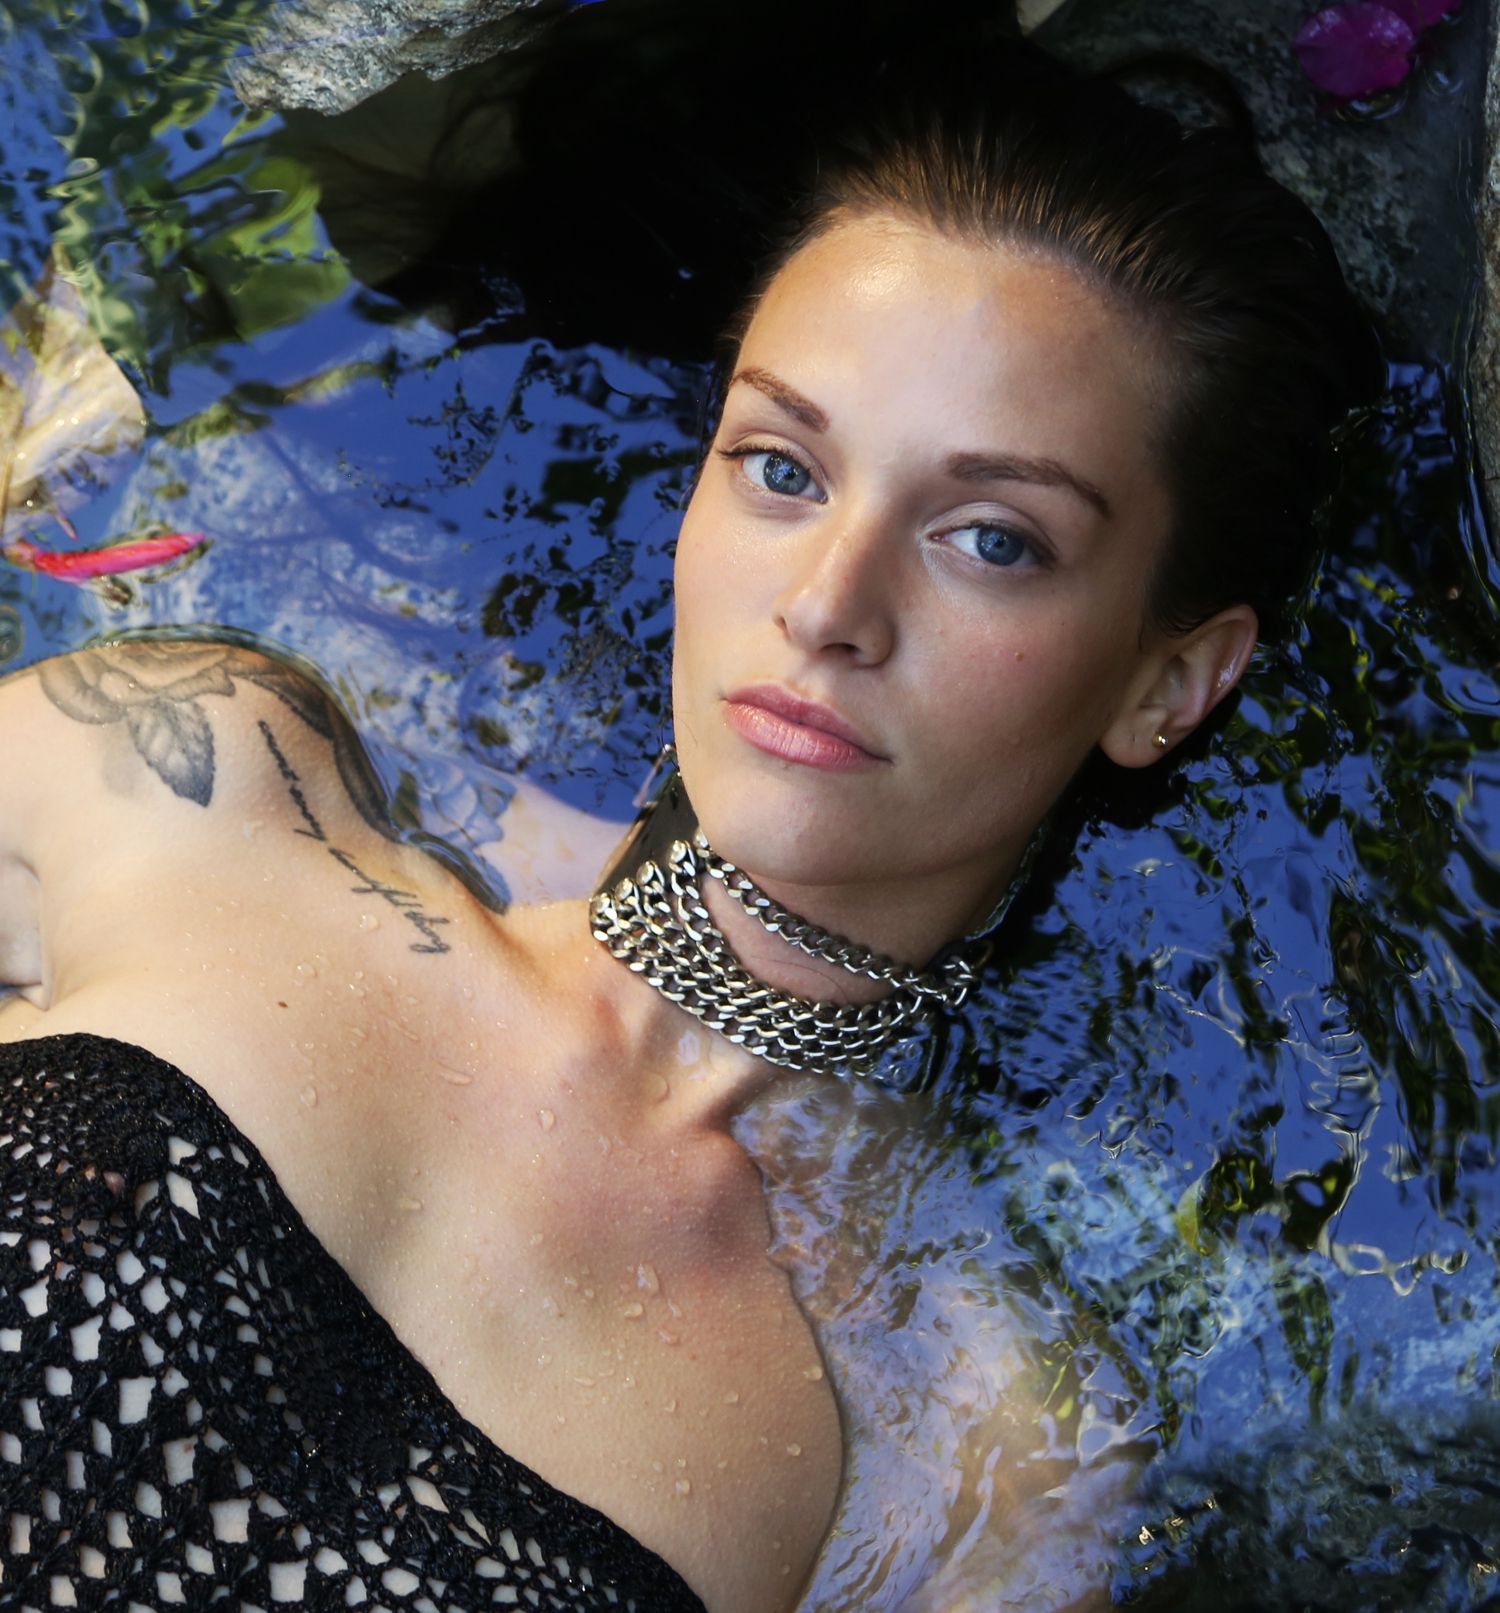 beauty under water fashion shoot wet hair pool tropical